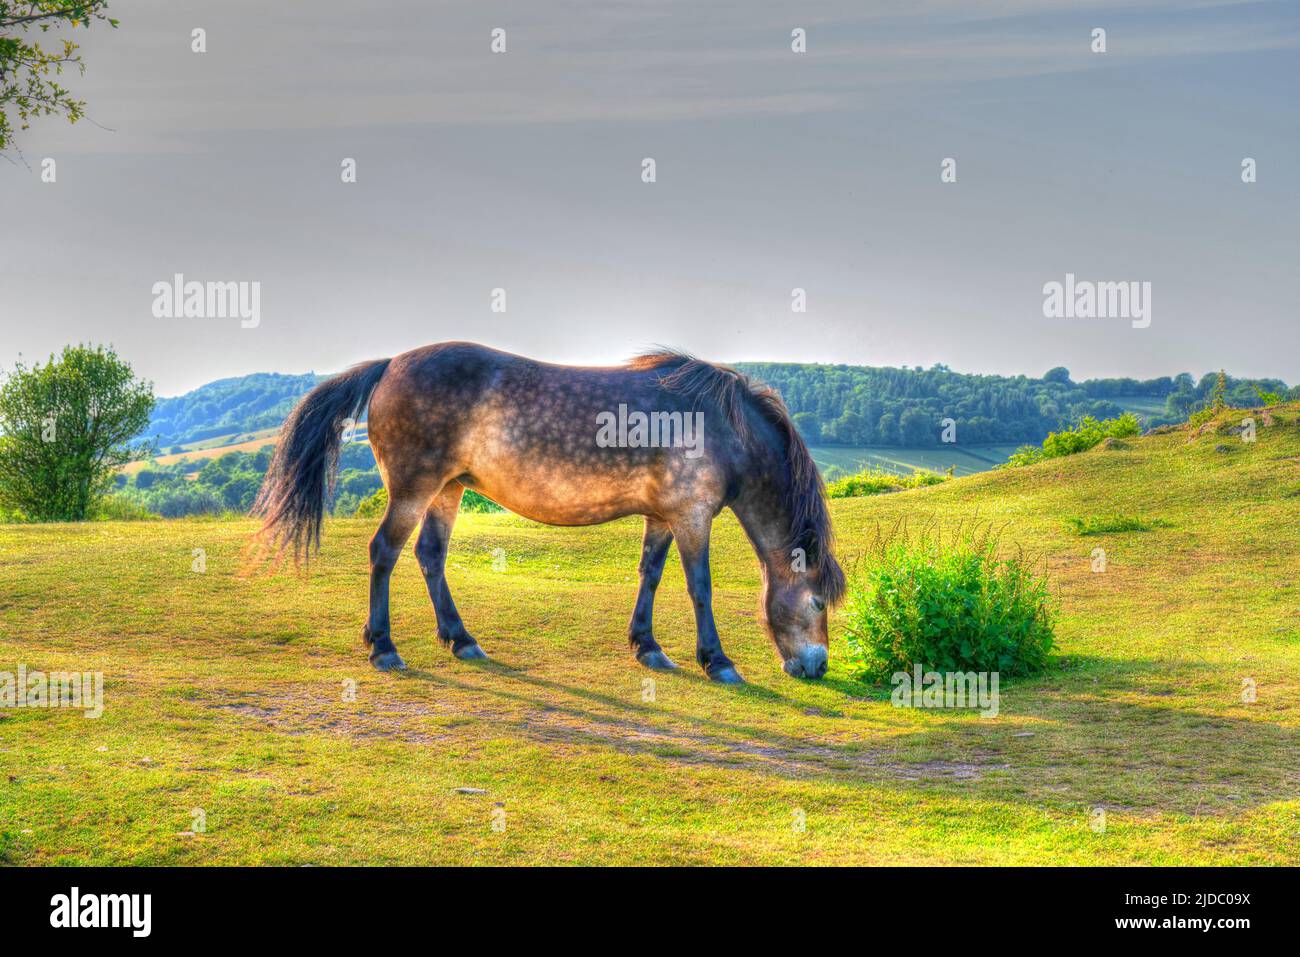 Exmoor pony grazing The Quantock Hills HDR in Uk countryside Stock Photo